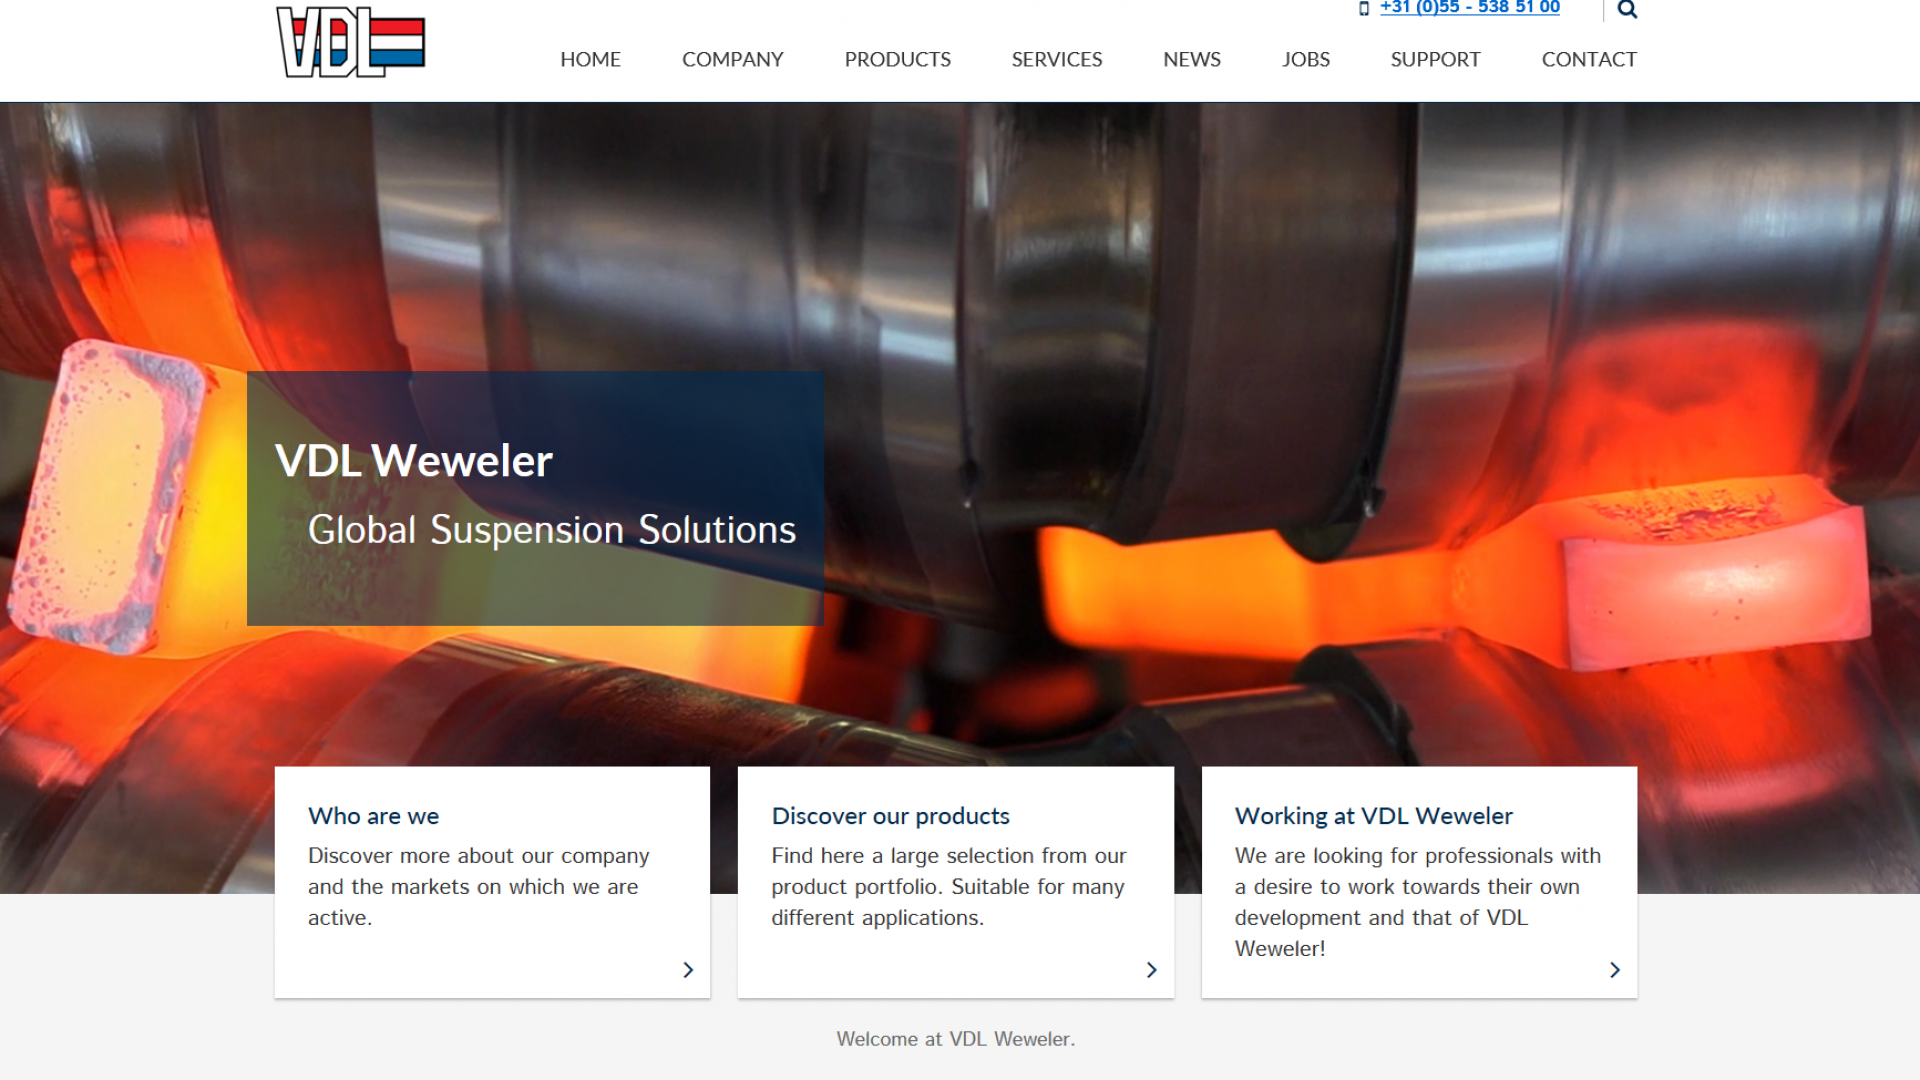 VDL Weweler launches new website!